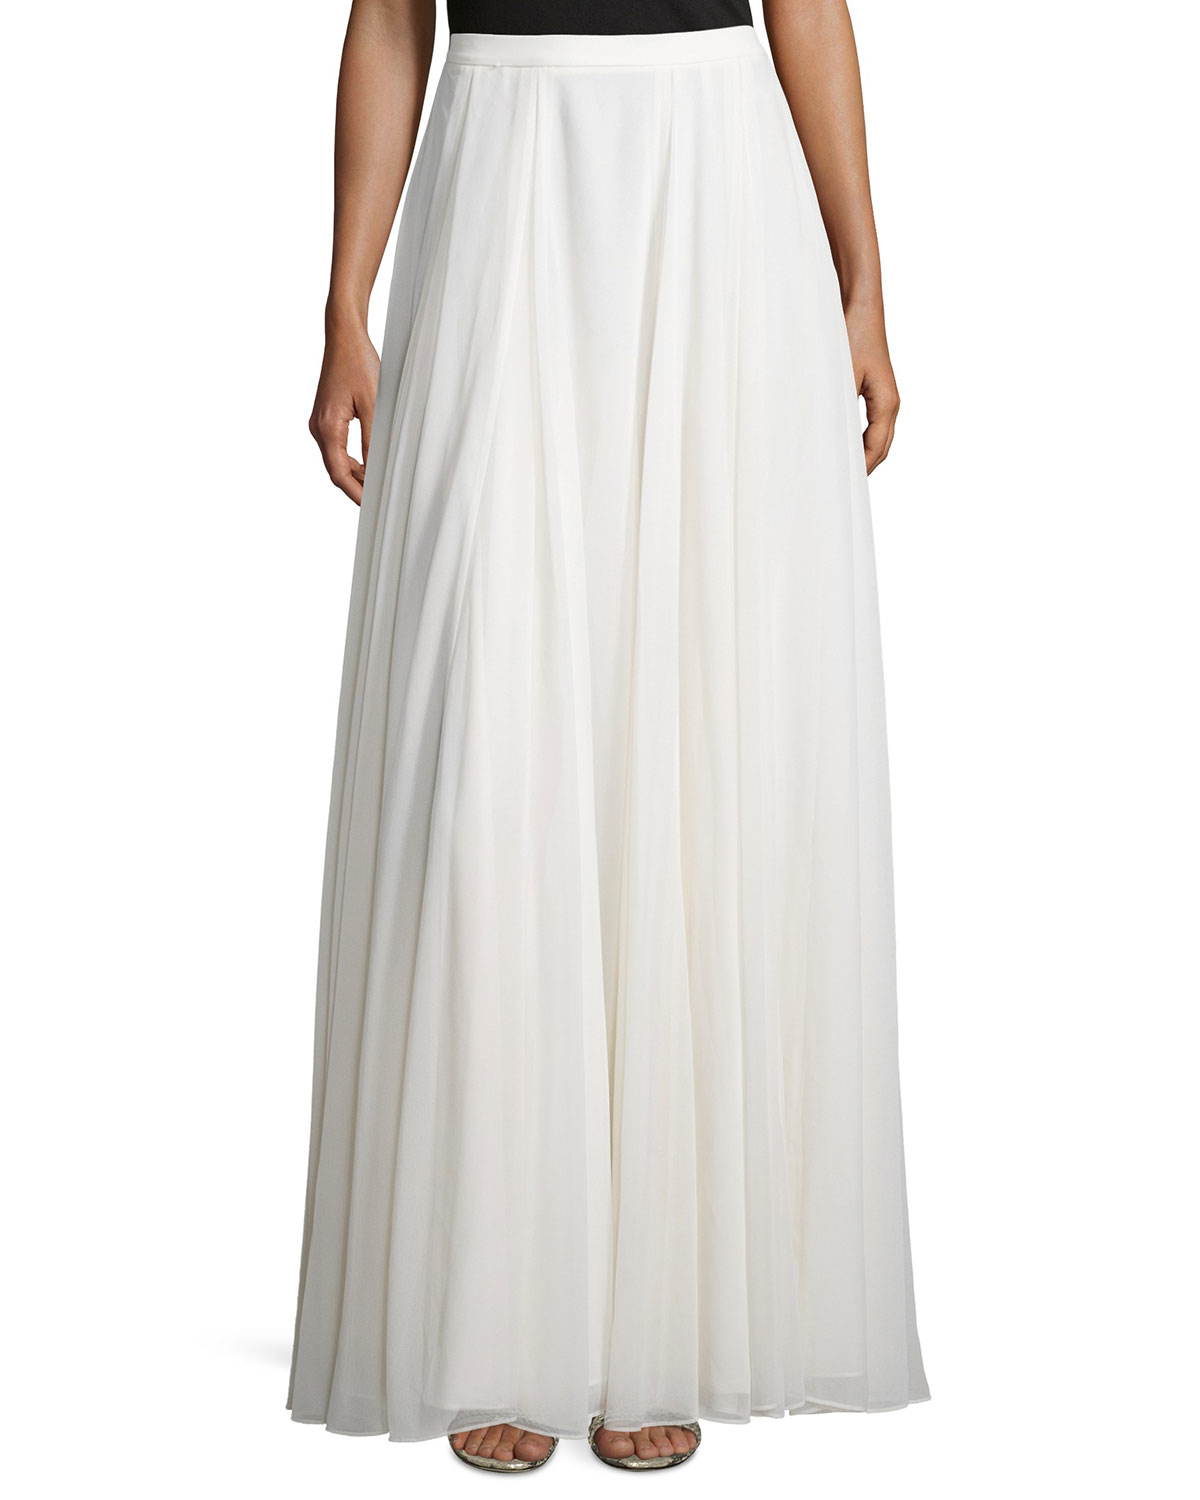 Lyst - Halston Flowy Pleated Maxi Skirt in White